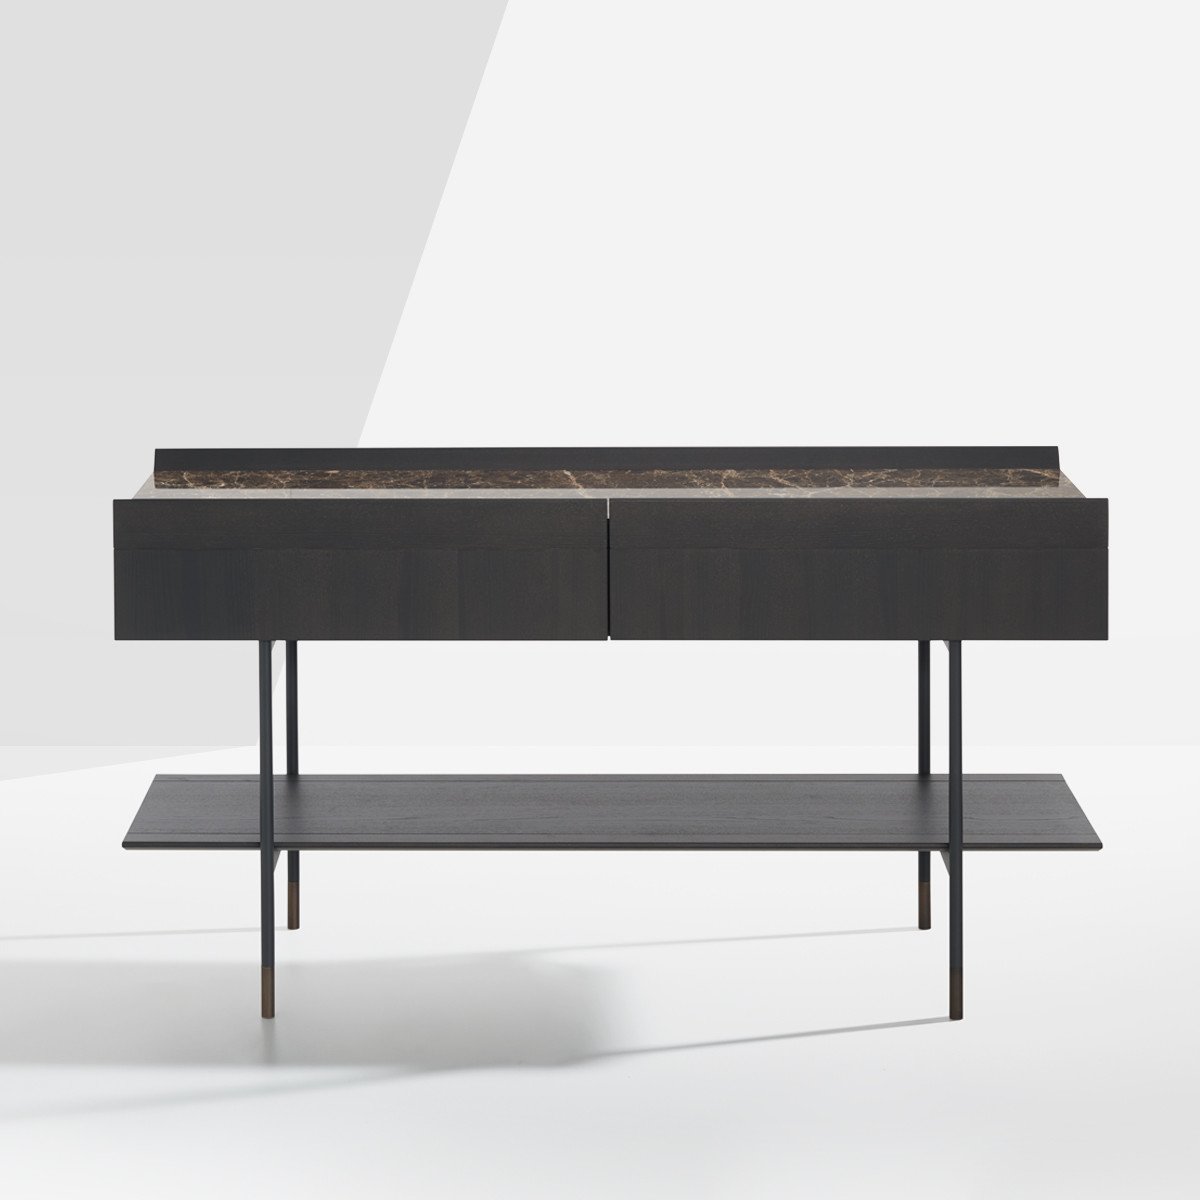 Arial Console table from Potocco, designed by Gabriele & Oscar Buratti